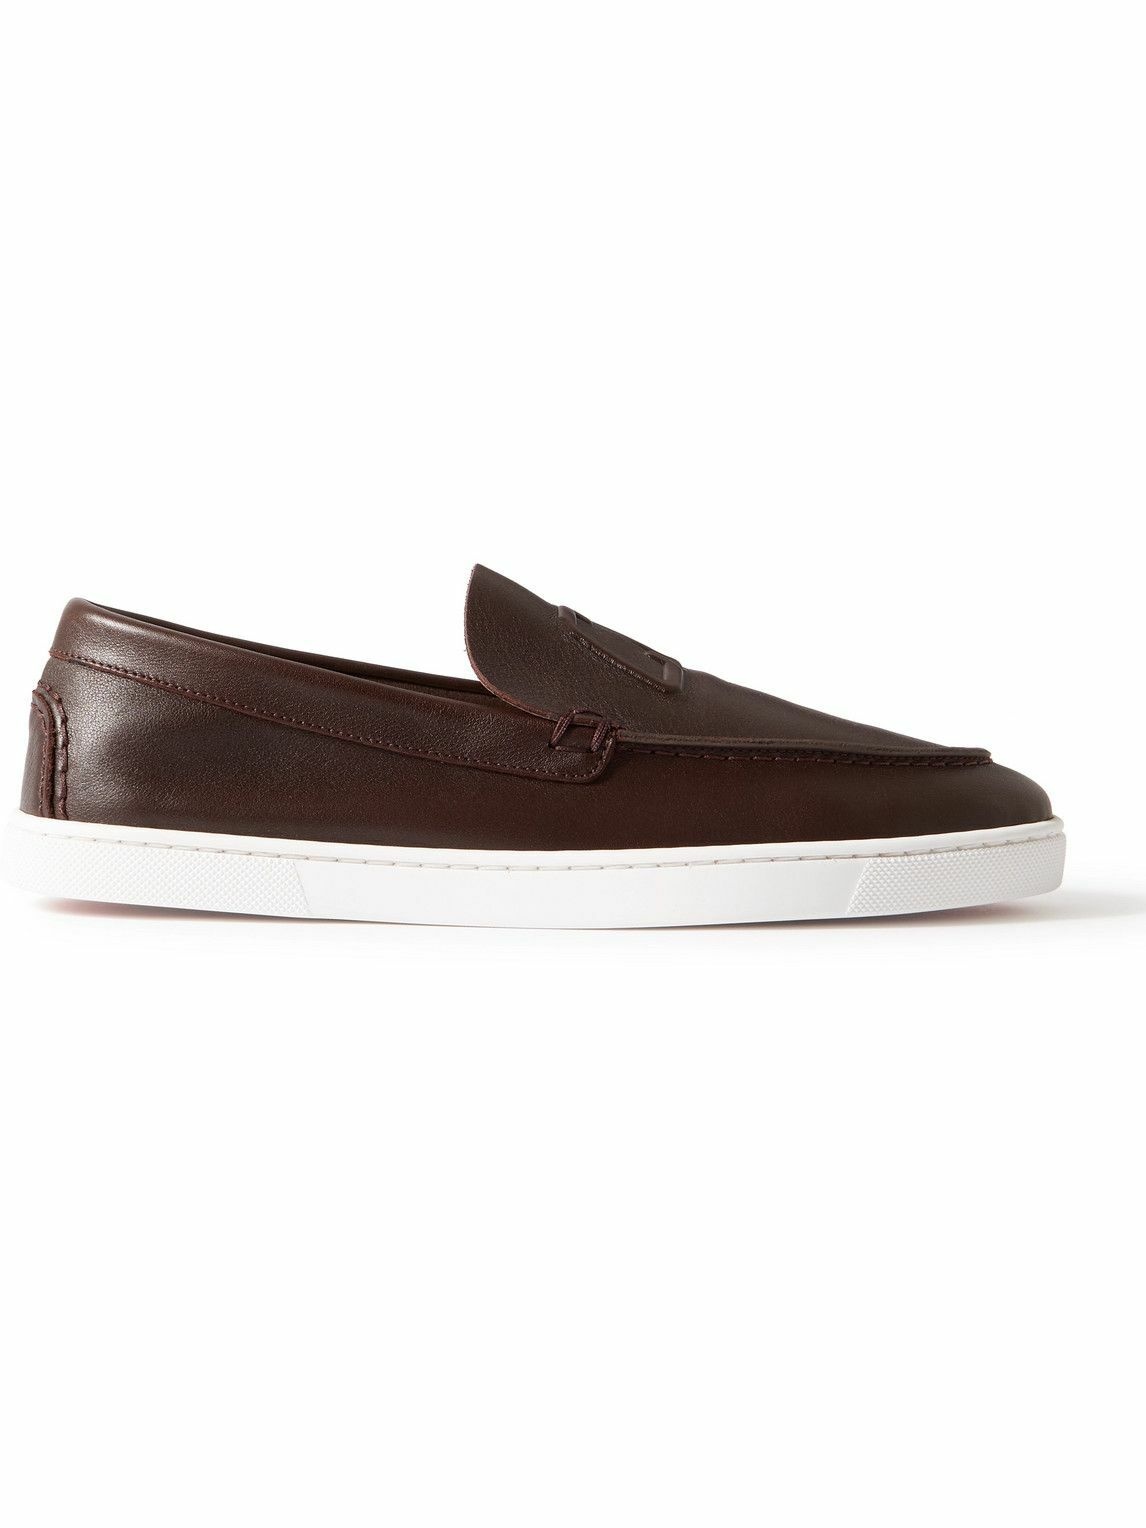 Photo: Christian Louboutin - Varsiboat Logo-Embossed Leather Loafers - Brown